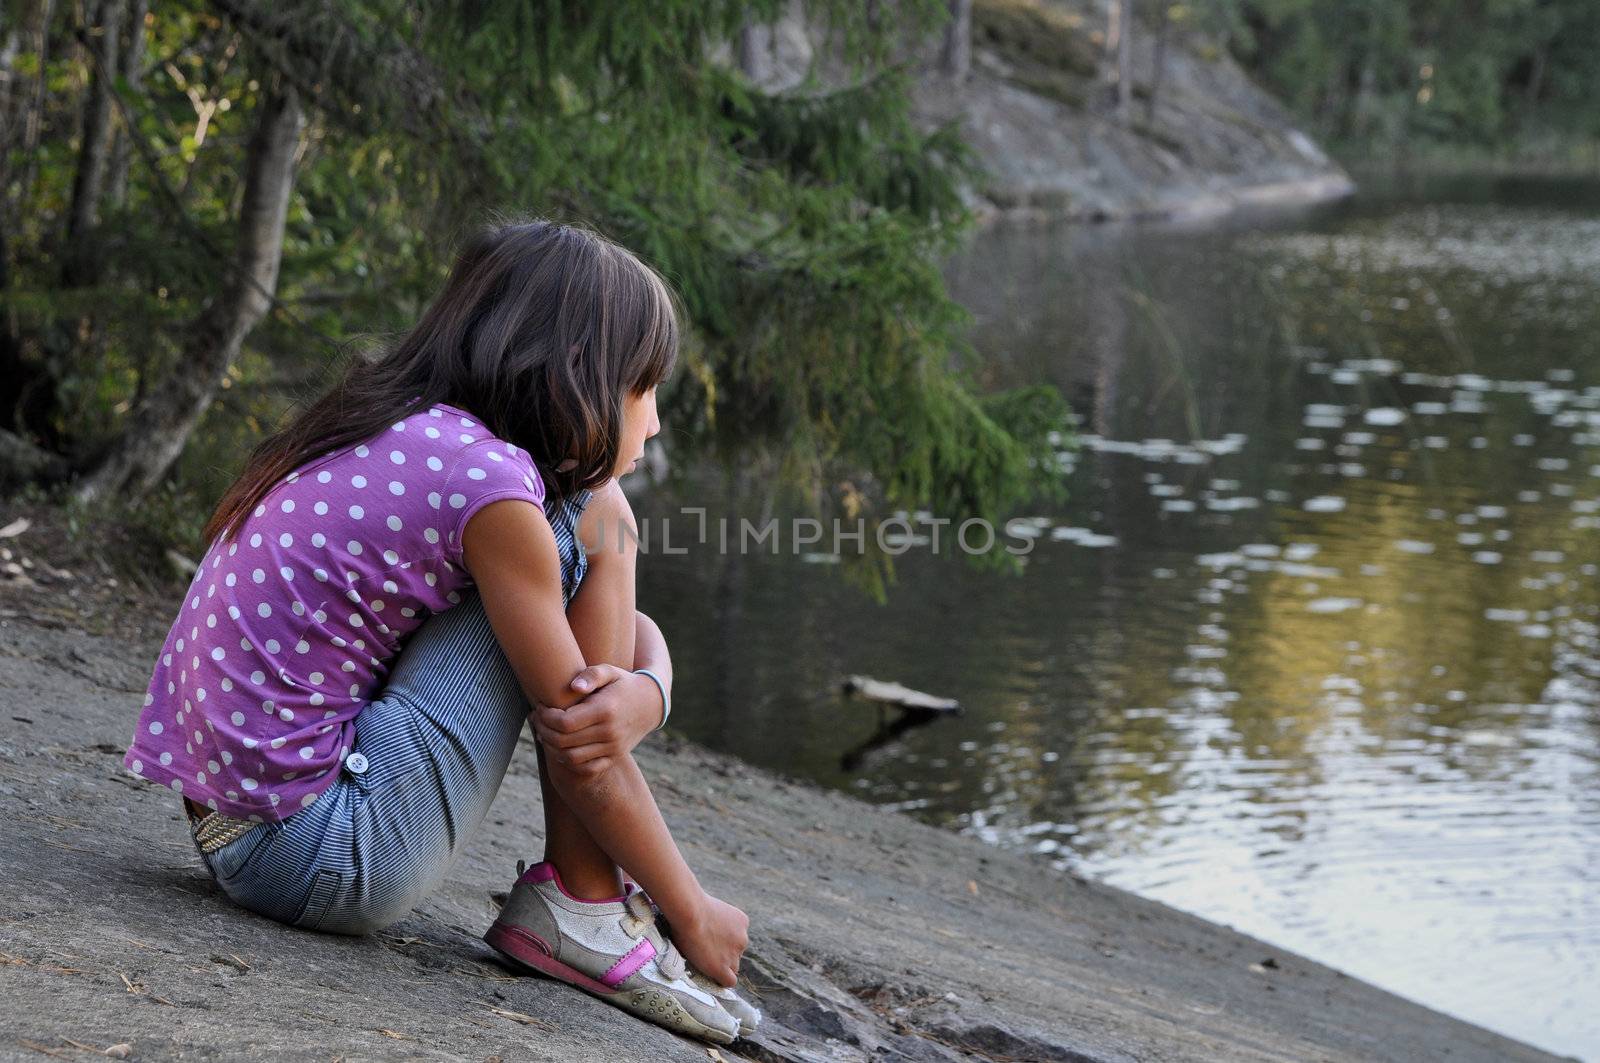 A contemplating girl sitting by a calm lake in Sweden.